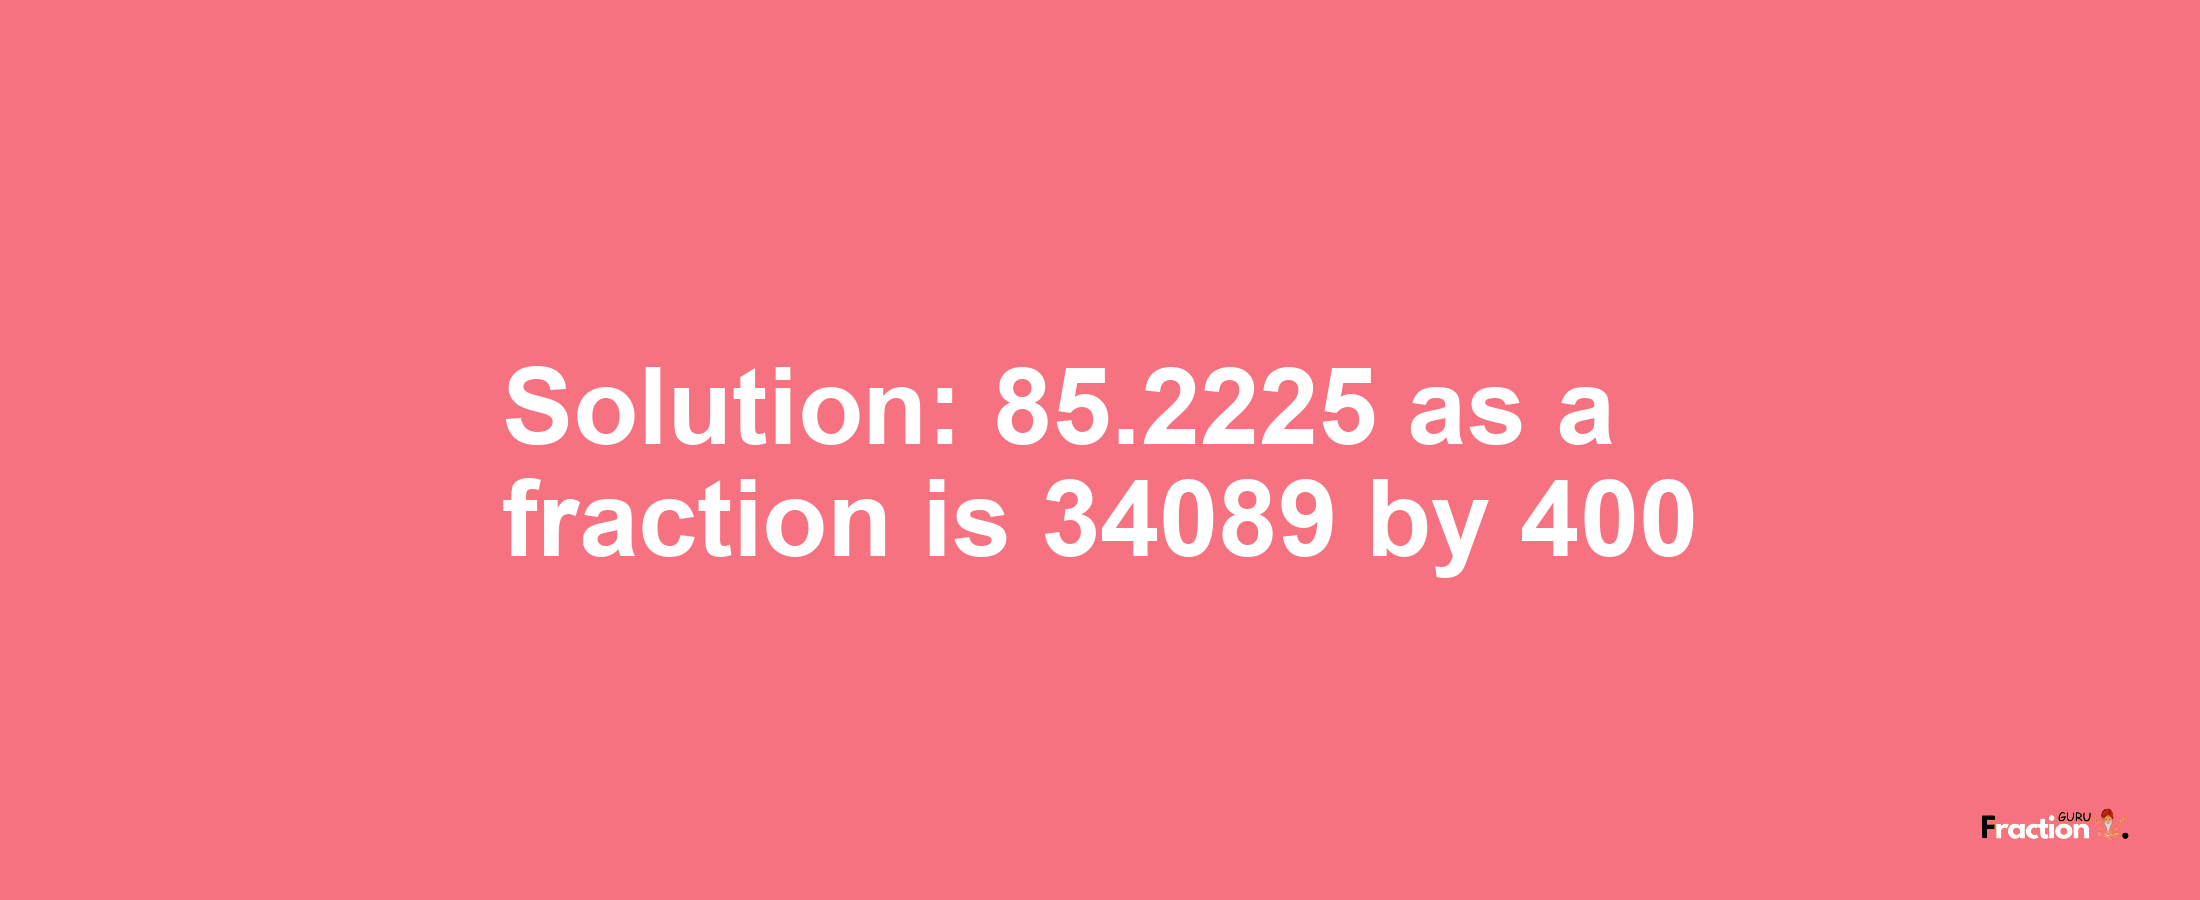 Solution:85.2225 as a fraction is 34089/400